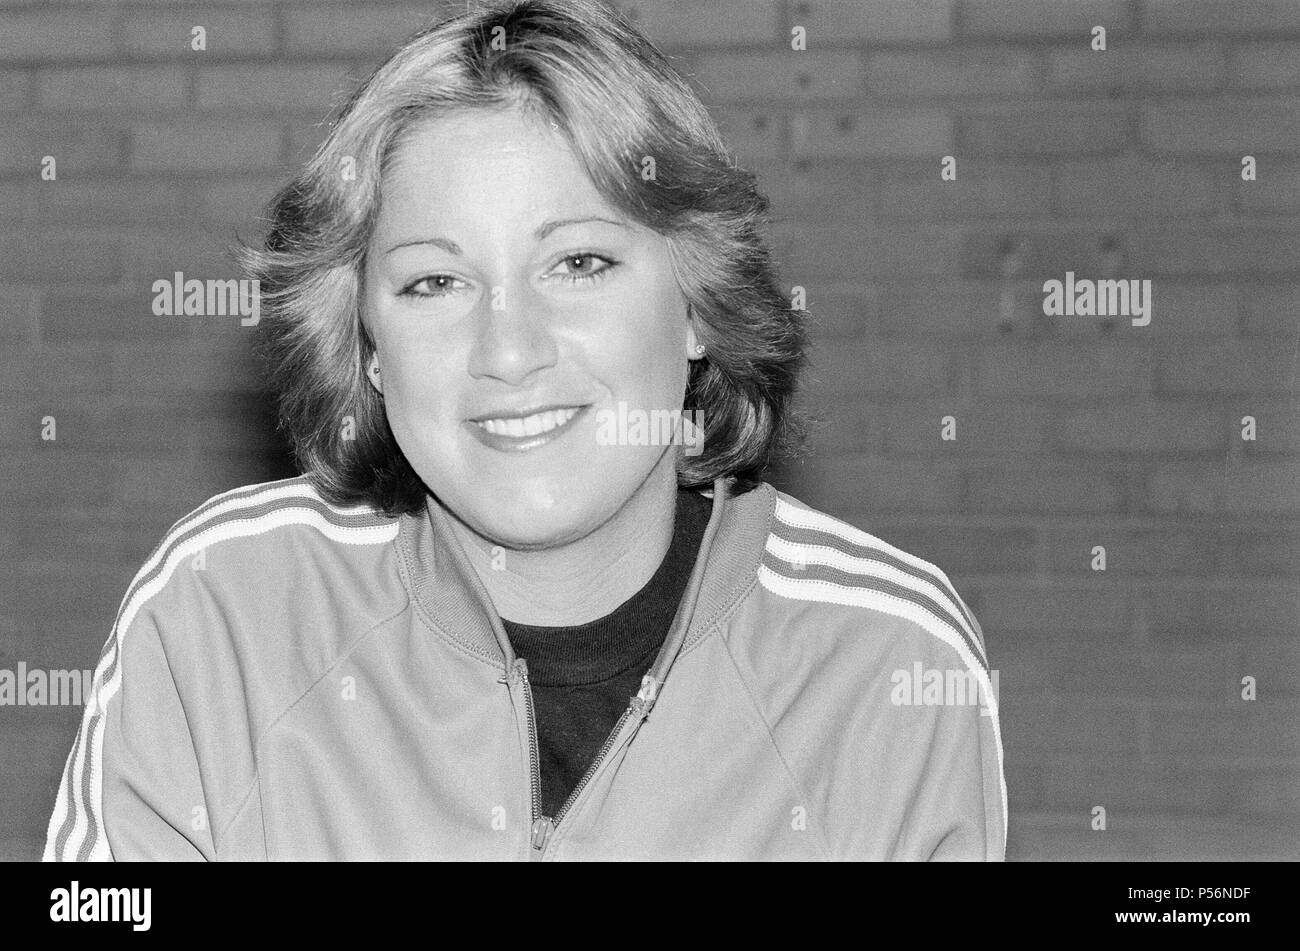 Chris Evert, United States Tennis Player, aged 21 years old, pictured between matches in the Dewar Cup International Tennis Tournament, at the Royal Albert Hall, London, Tuesday 2nd November 1976. Stock Photo